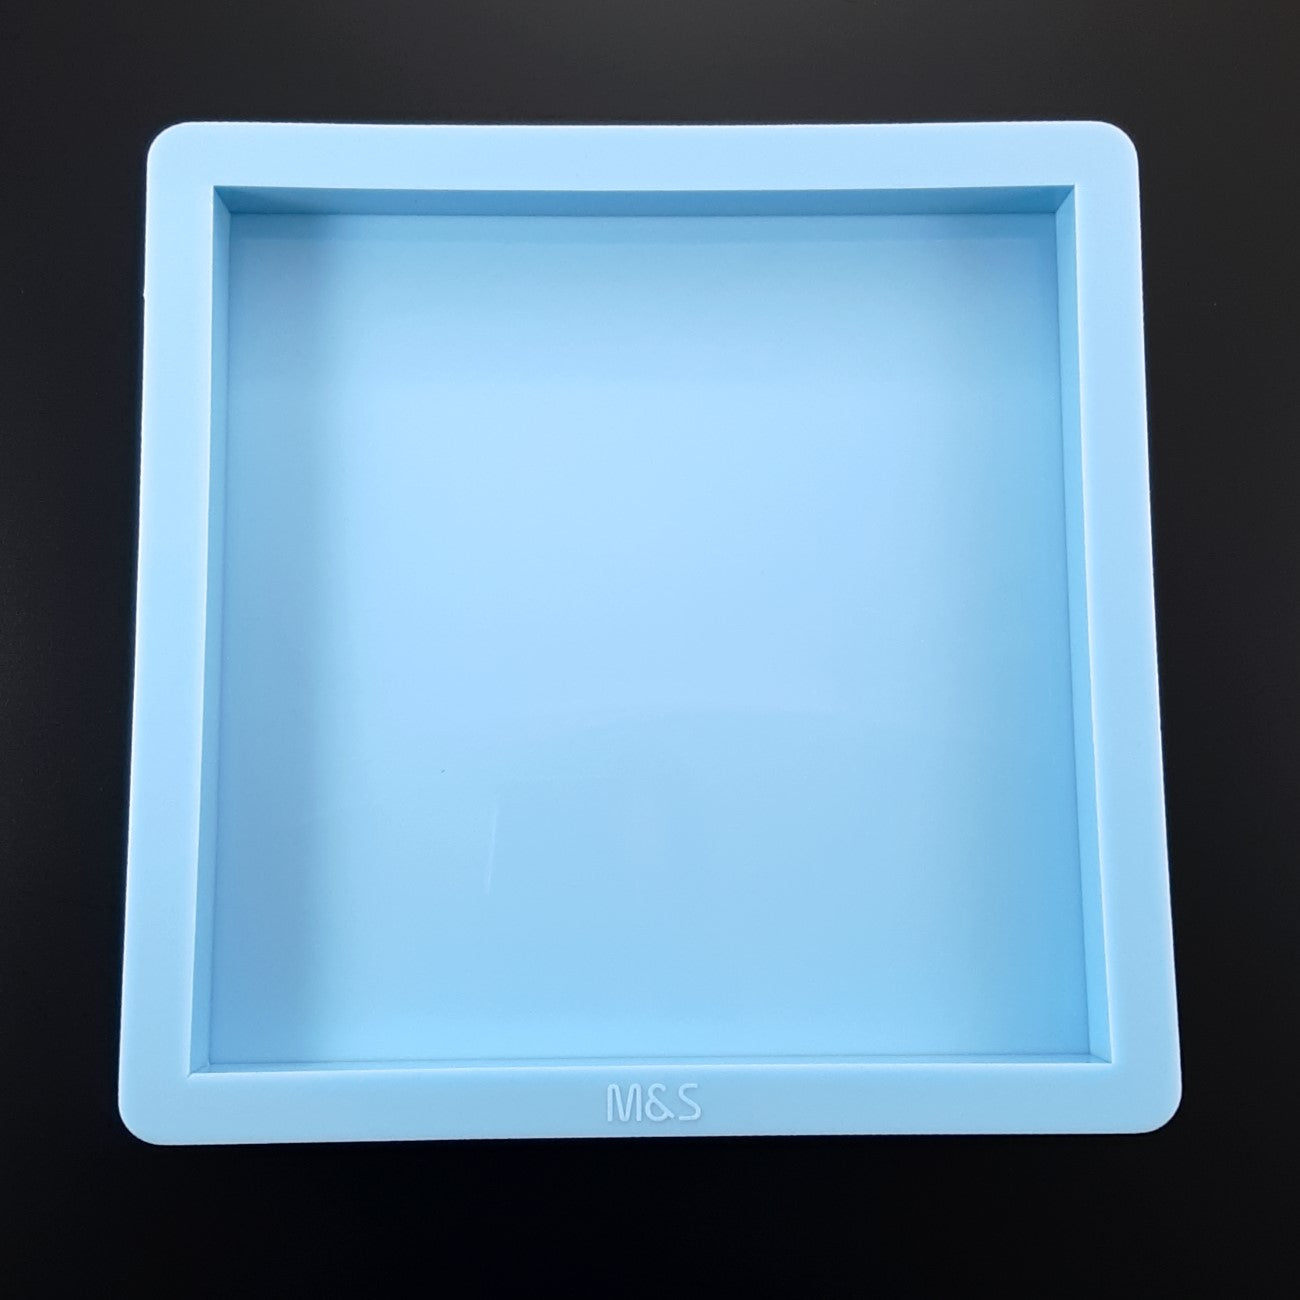 2cm-5cm Epoxy Resin Molds Transparent Silicone Square Mold For DIY